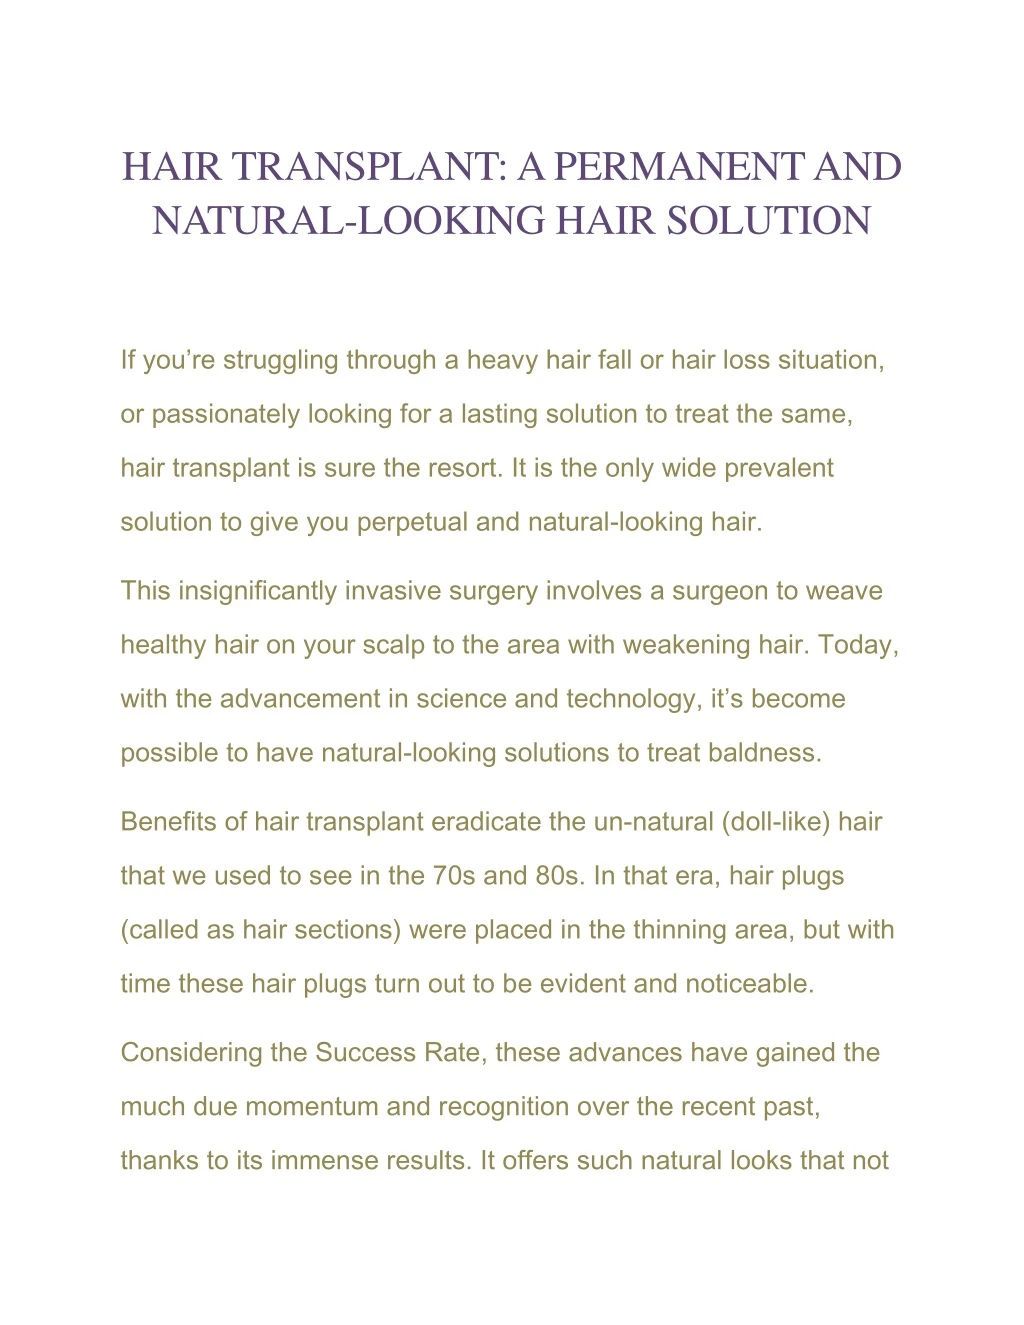 hair transplant a permanent and natural looking